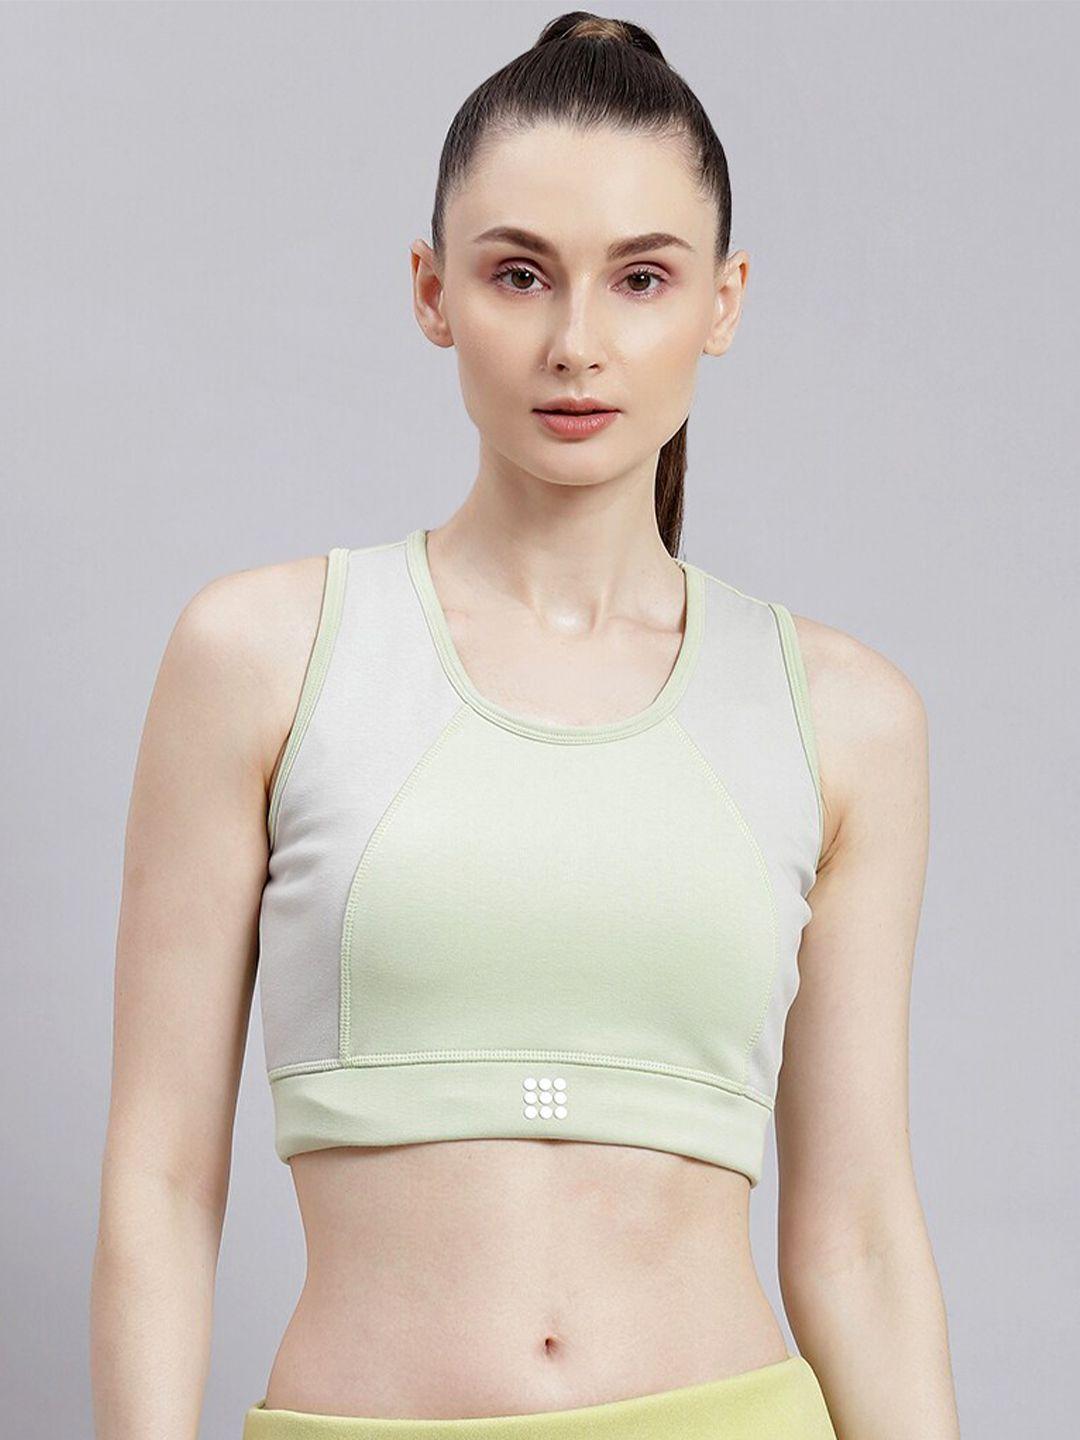 rock.it full coverage non-wired colourblocked workout bra with 360 degree support